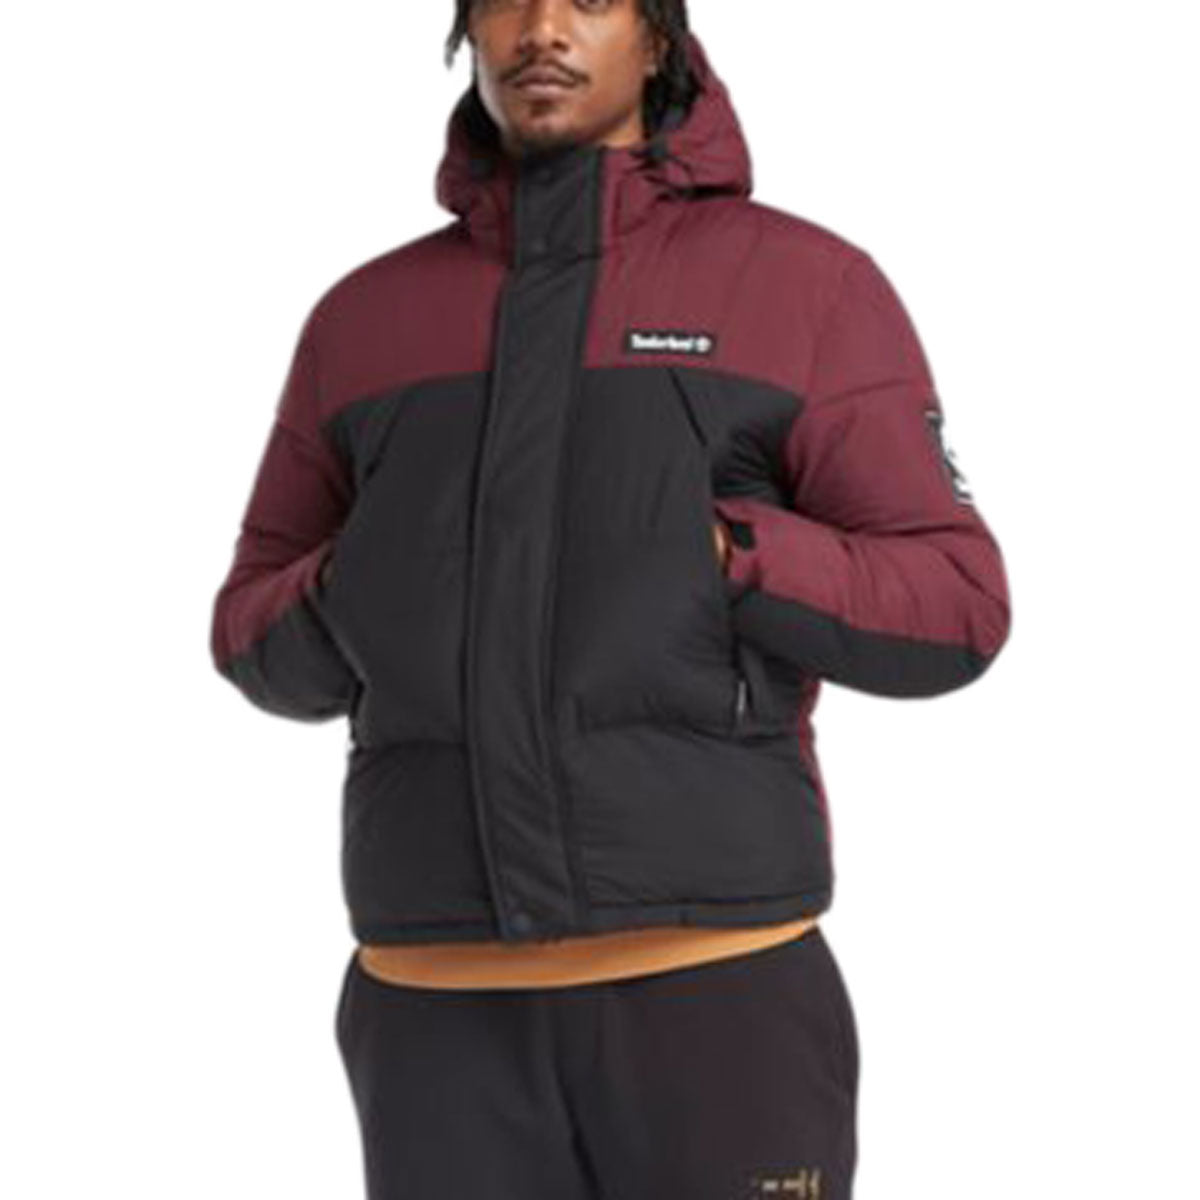 Timberland DWR Outdoor Archive Puffer Jacket - Port Royale/Black image 4